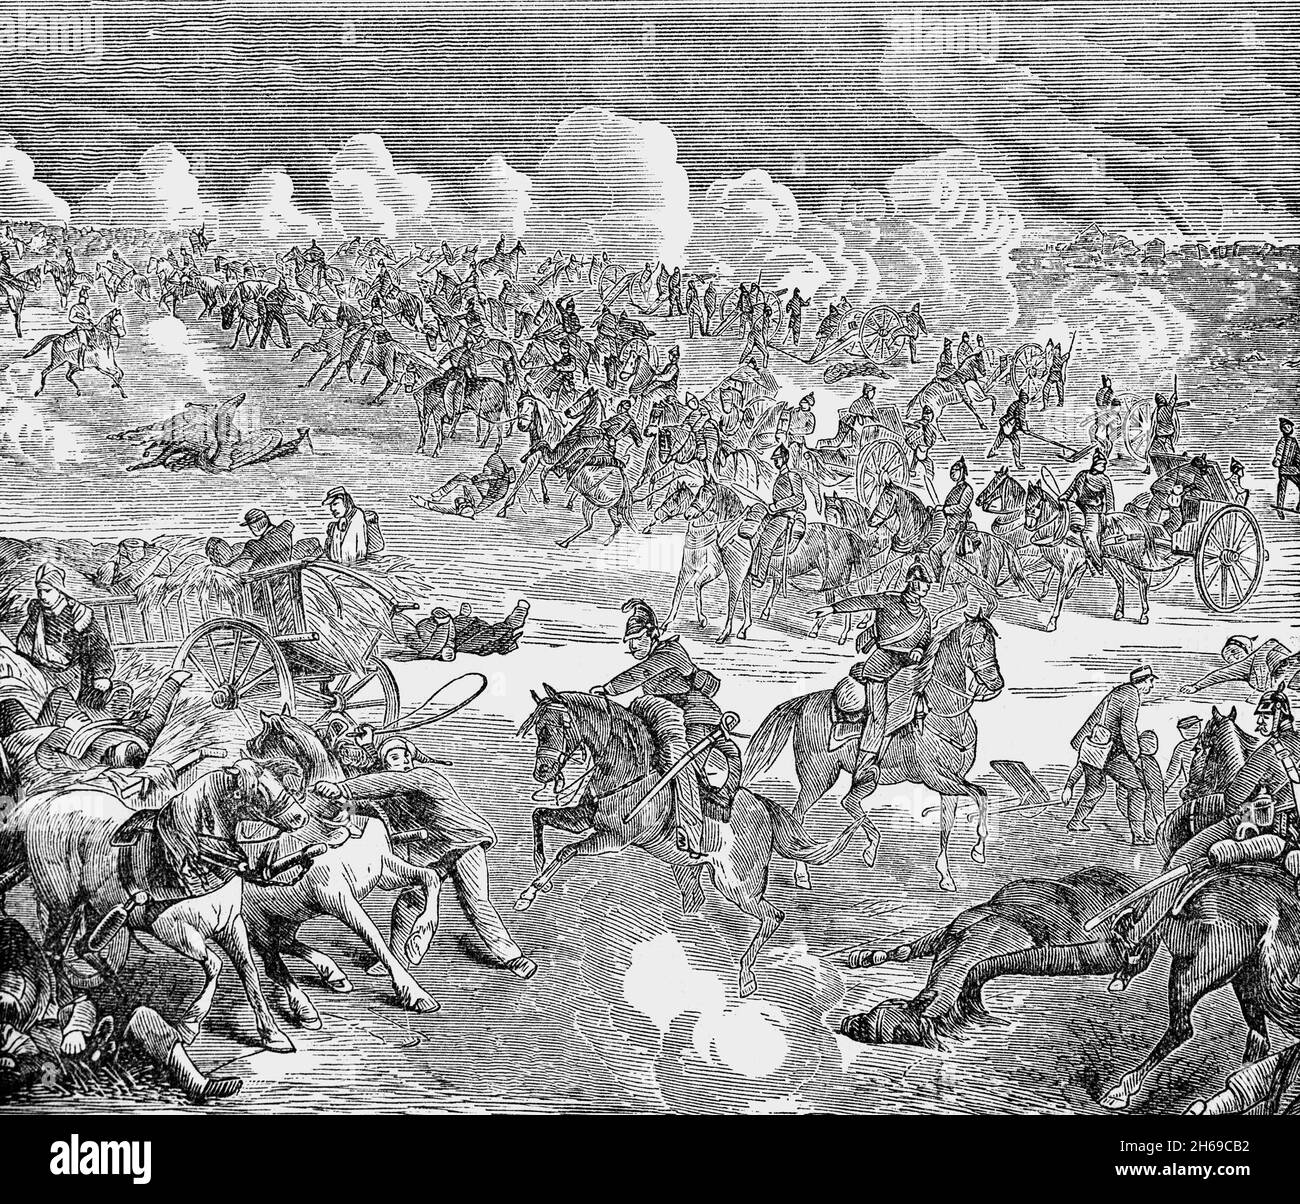 A late 19th Century illustration of the Battle of Königgrätz (aka Sadowa), a decisive battle of the Austro-Prussian War in which the Kingdom of Prussia defeated the Austrian Empire. It took place on 3 July 1866, near the Bohemian towns of Königgrätz, (now Hradec Králové, Czech Republic) and Sadowa (now Sadová, Czech Republic). The outnumbered Prussian infantry used their superior training and tactical doctrine and the Dreyse needle gun to win the battle and the entire war at Königgrätz on their own. Stock Photo